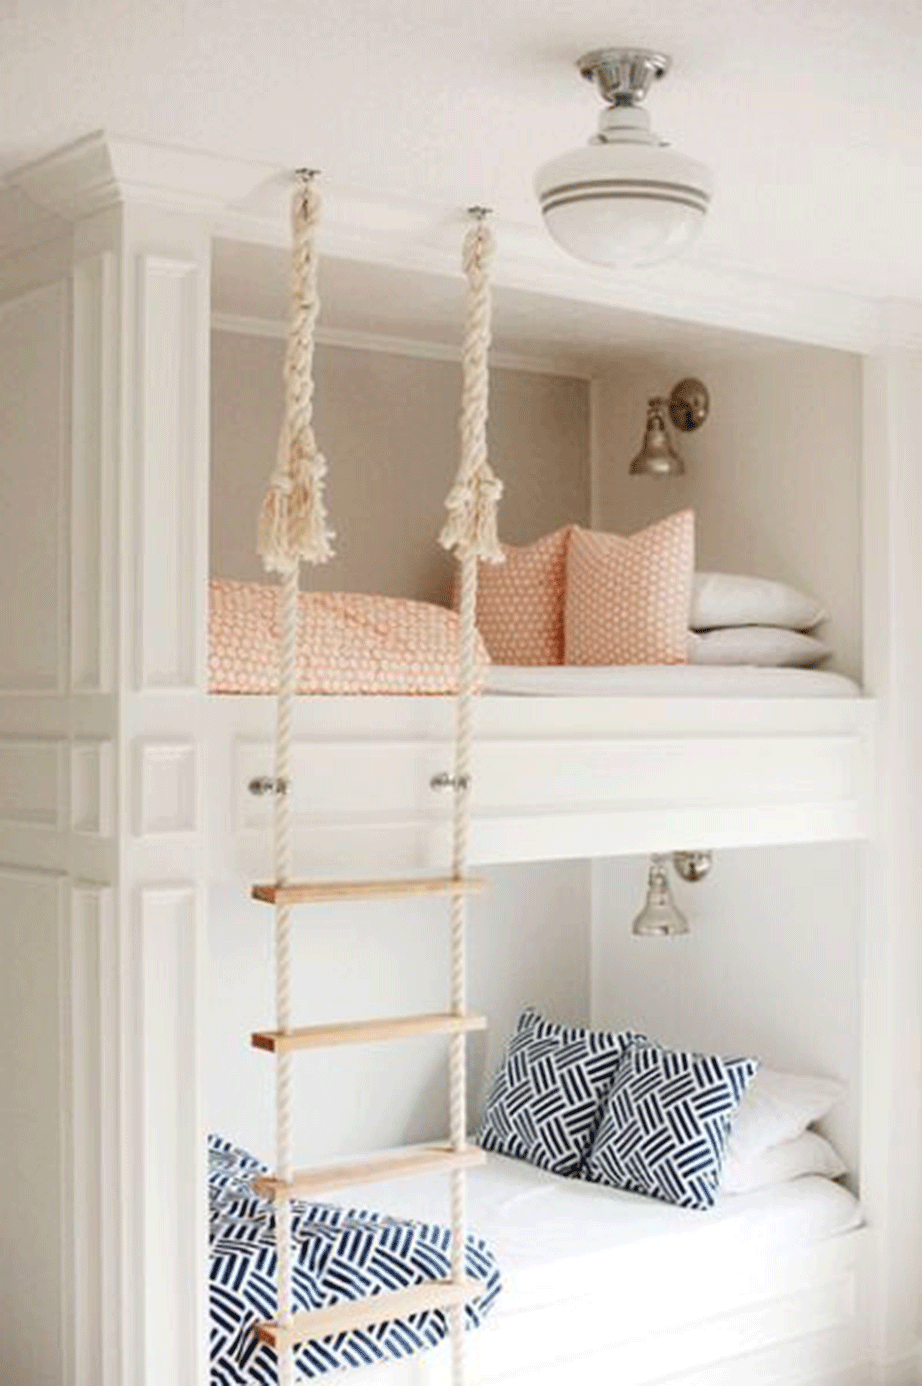 A ladder made of thick rope and wood hung from the ceiling will be more aesthetically beautiful than a solid construction.